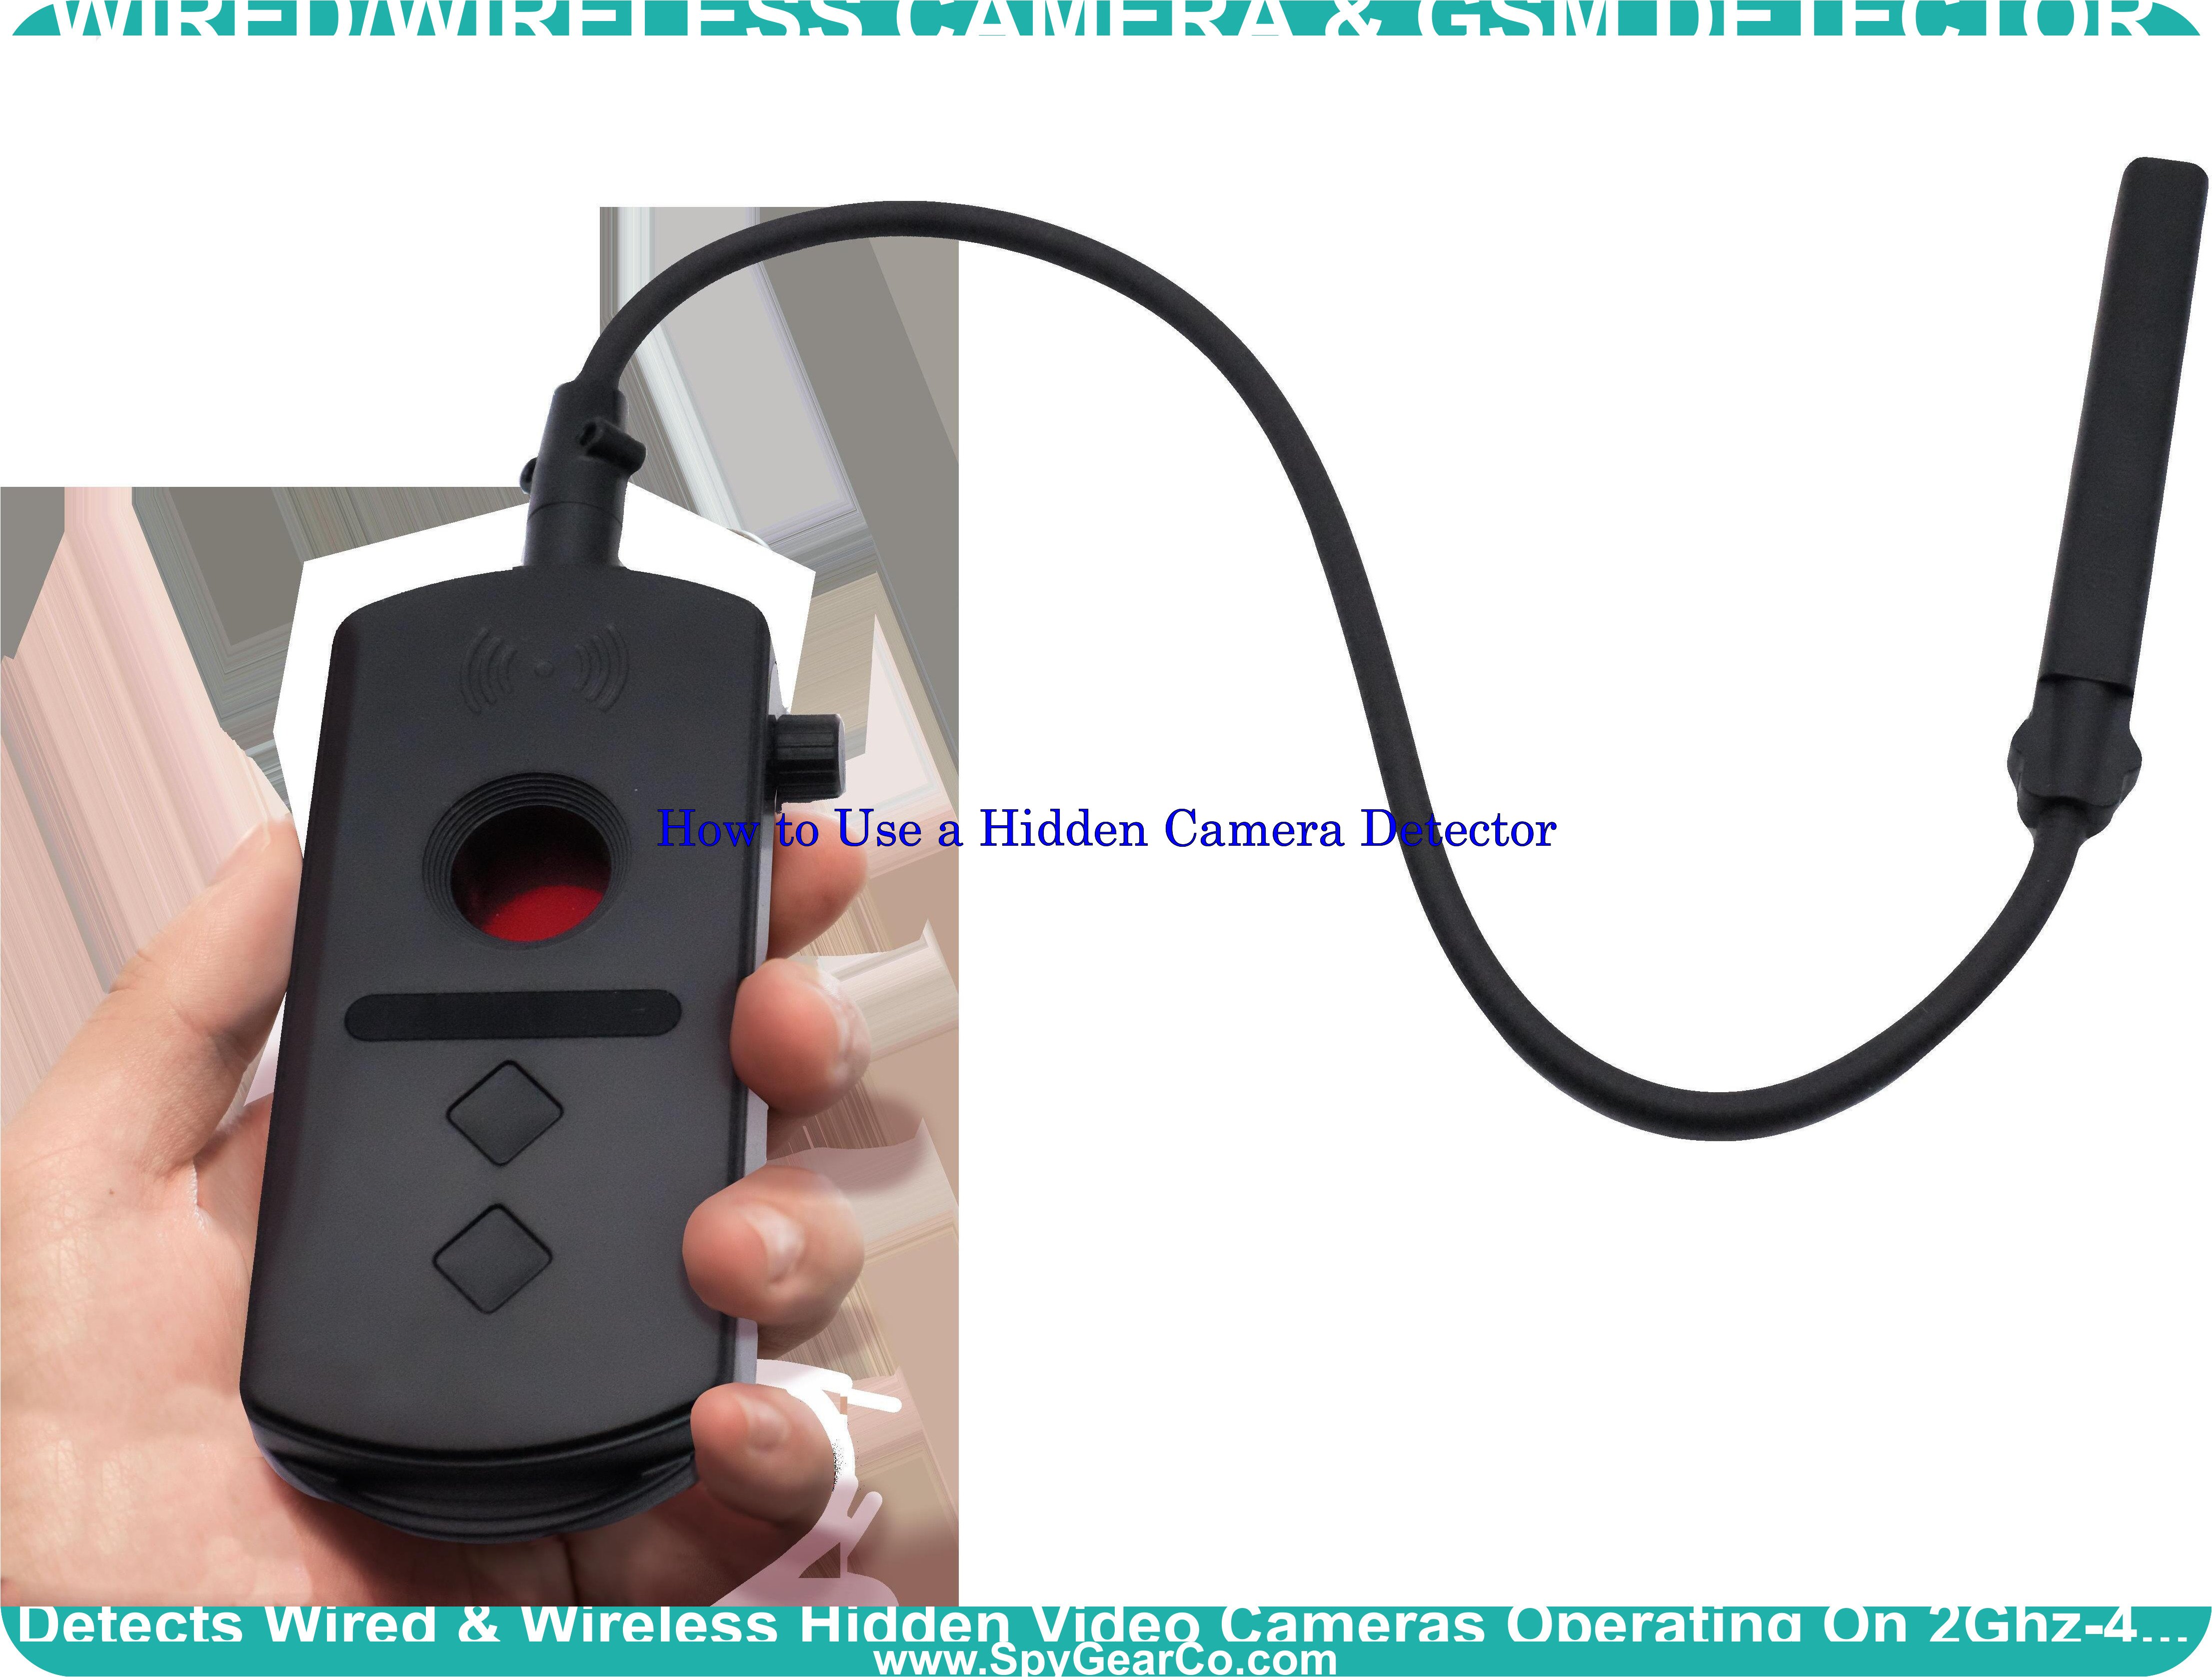 WIRED/WIRELESS CAMERA & GSM DETECTOR